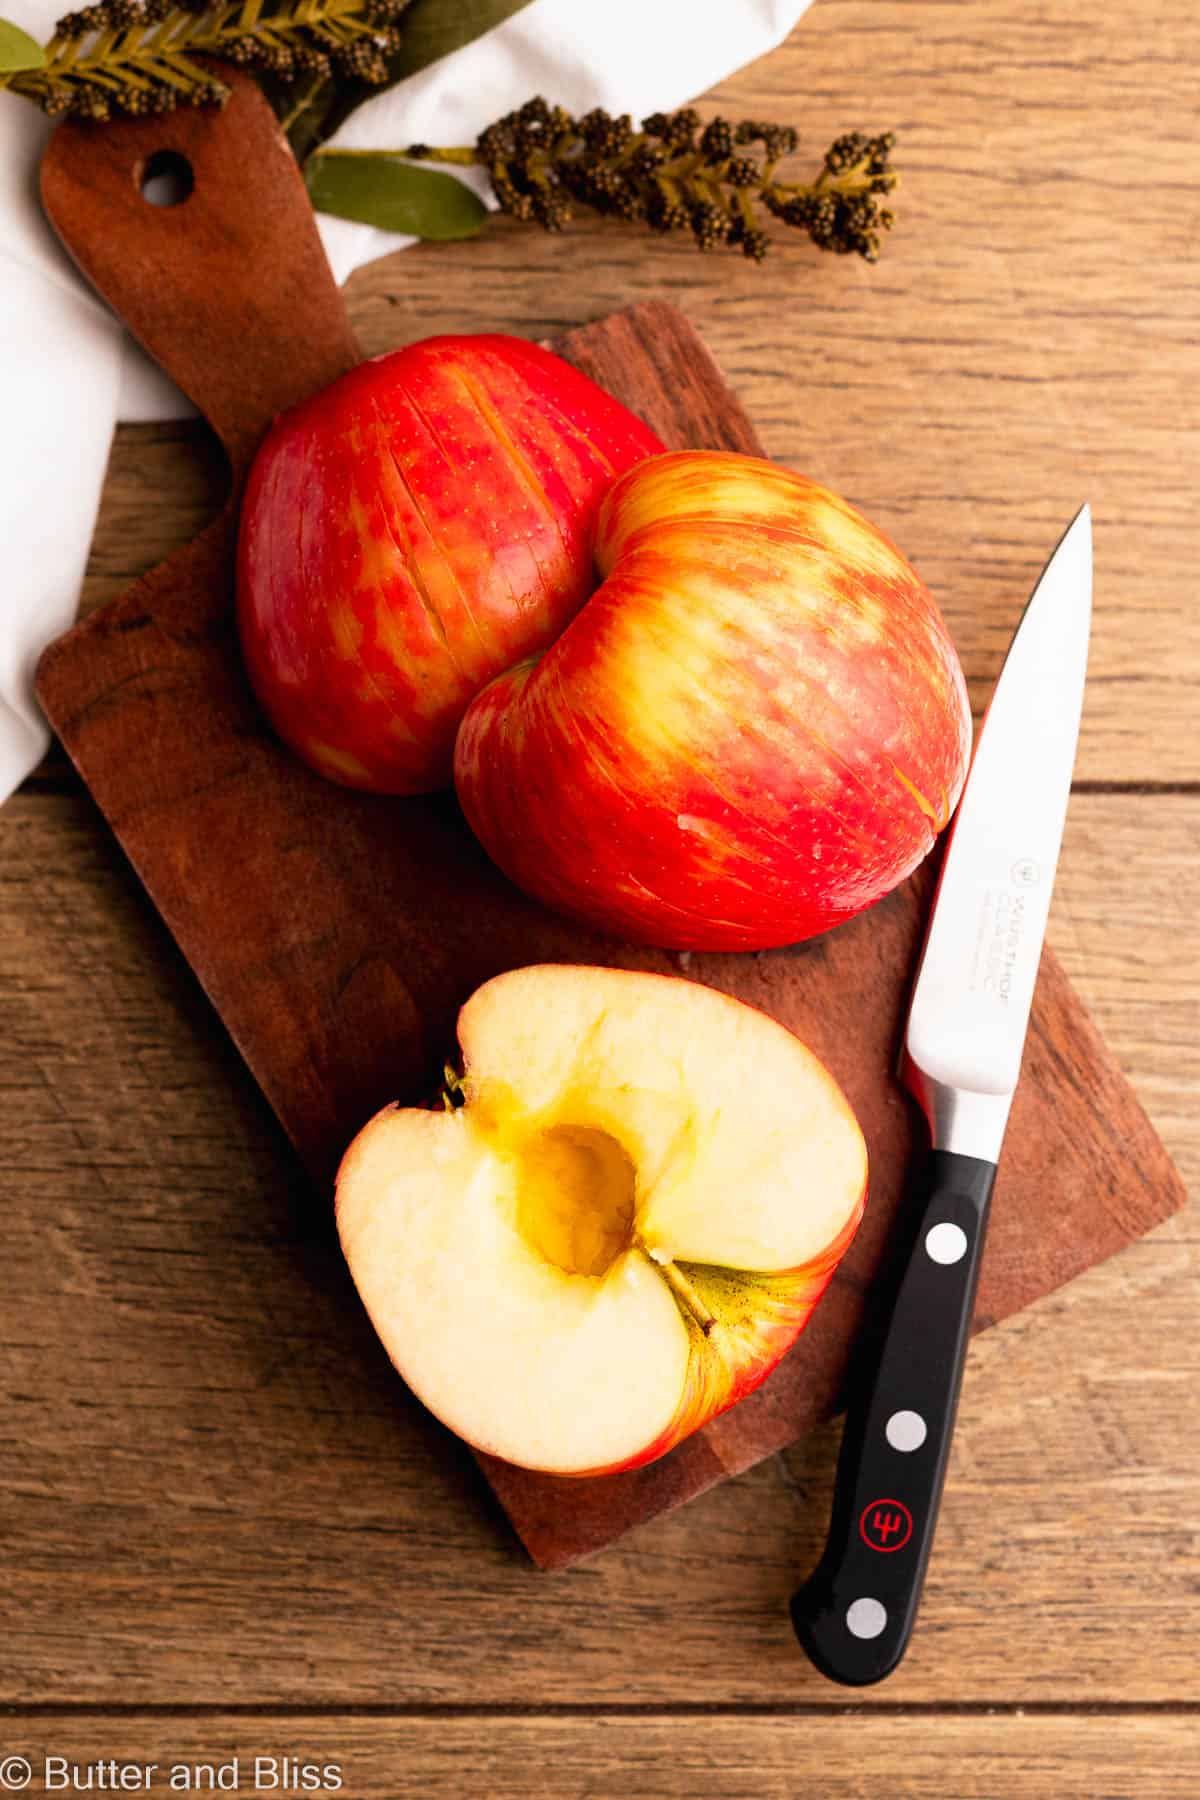 Sliced and cored Honeycrisp apple on a wood cutting board.